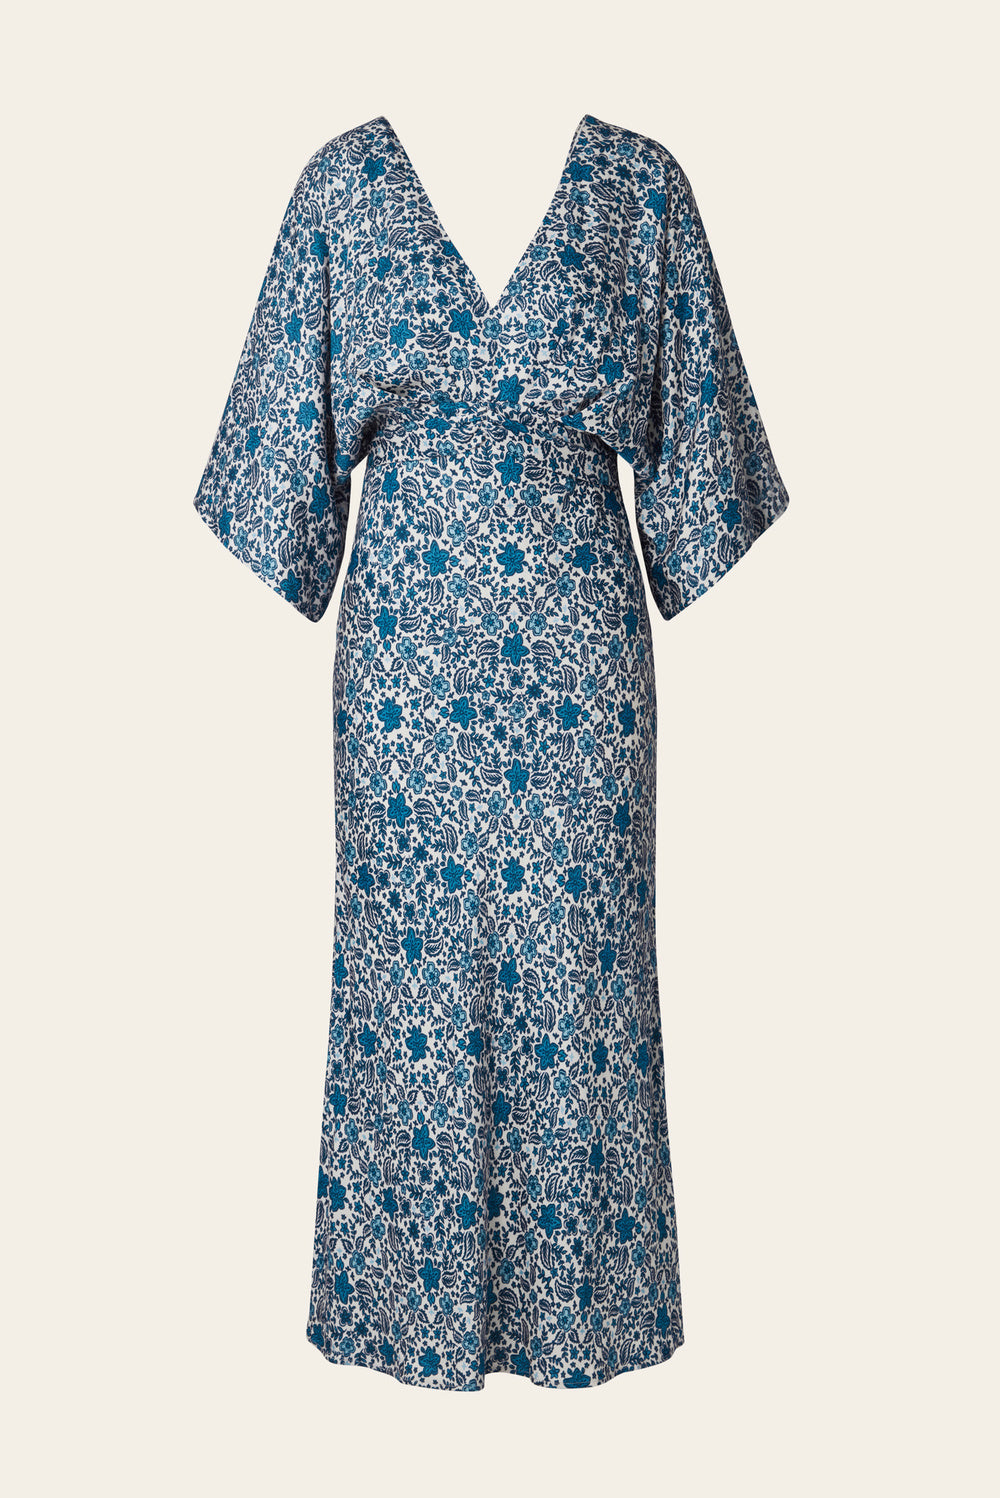 Blue ditsy floral V neck midi dress with elbow length sleeves and v back line with fabric tie